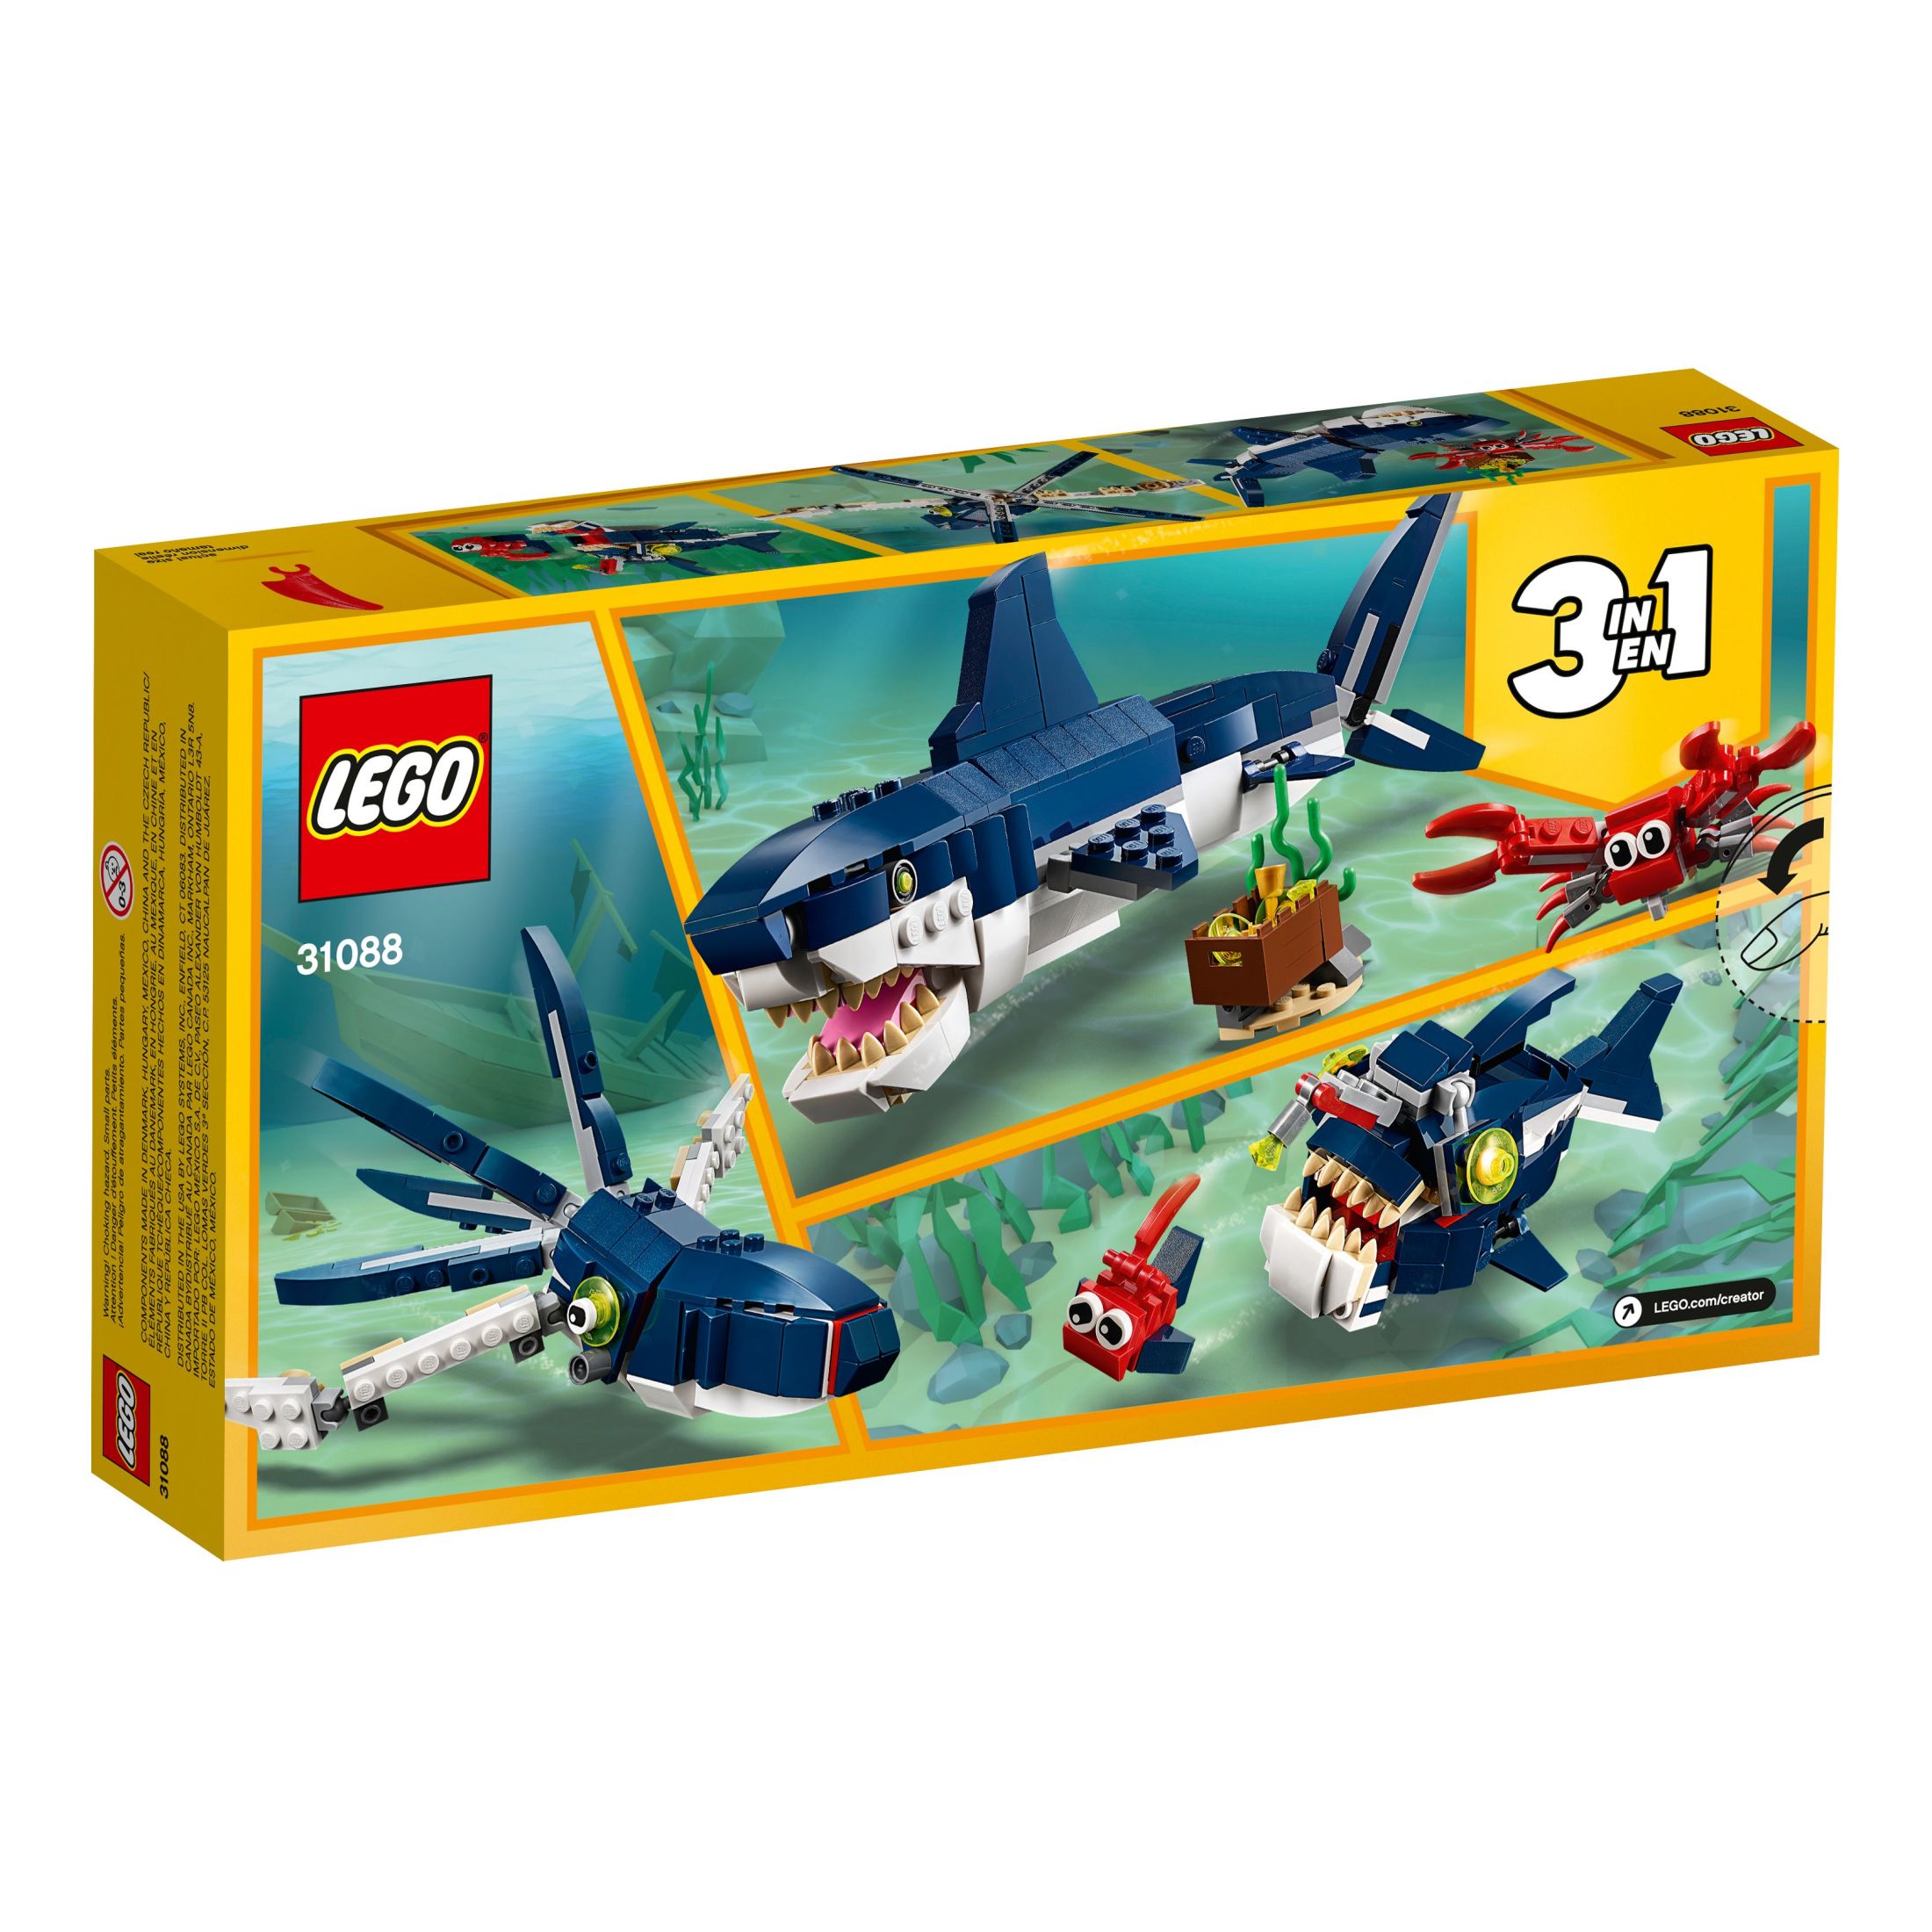 LEGO Creator 3 in 1 Deep Sea Creatures, Transforms from Shark and Crab to Squid to Angler Fish, Sea Animal Toys, Gifts for 7 Plus Year Old Girls and Boys, 31088 - image 5 of 6